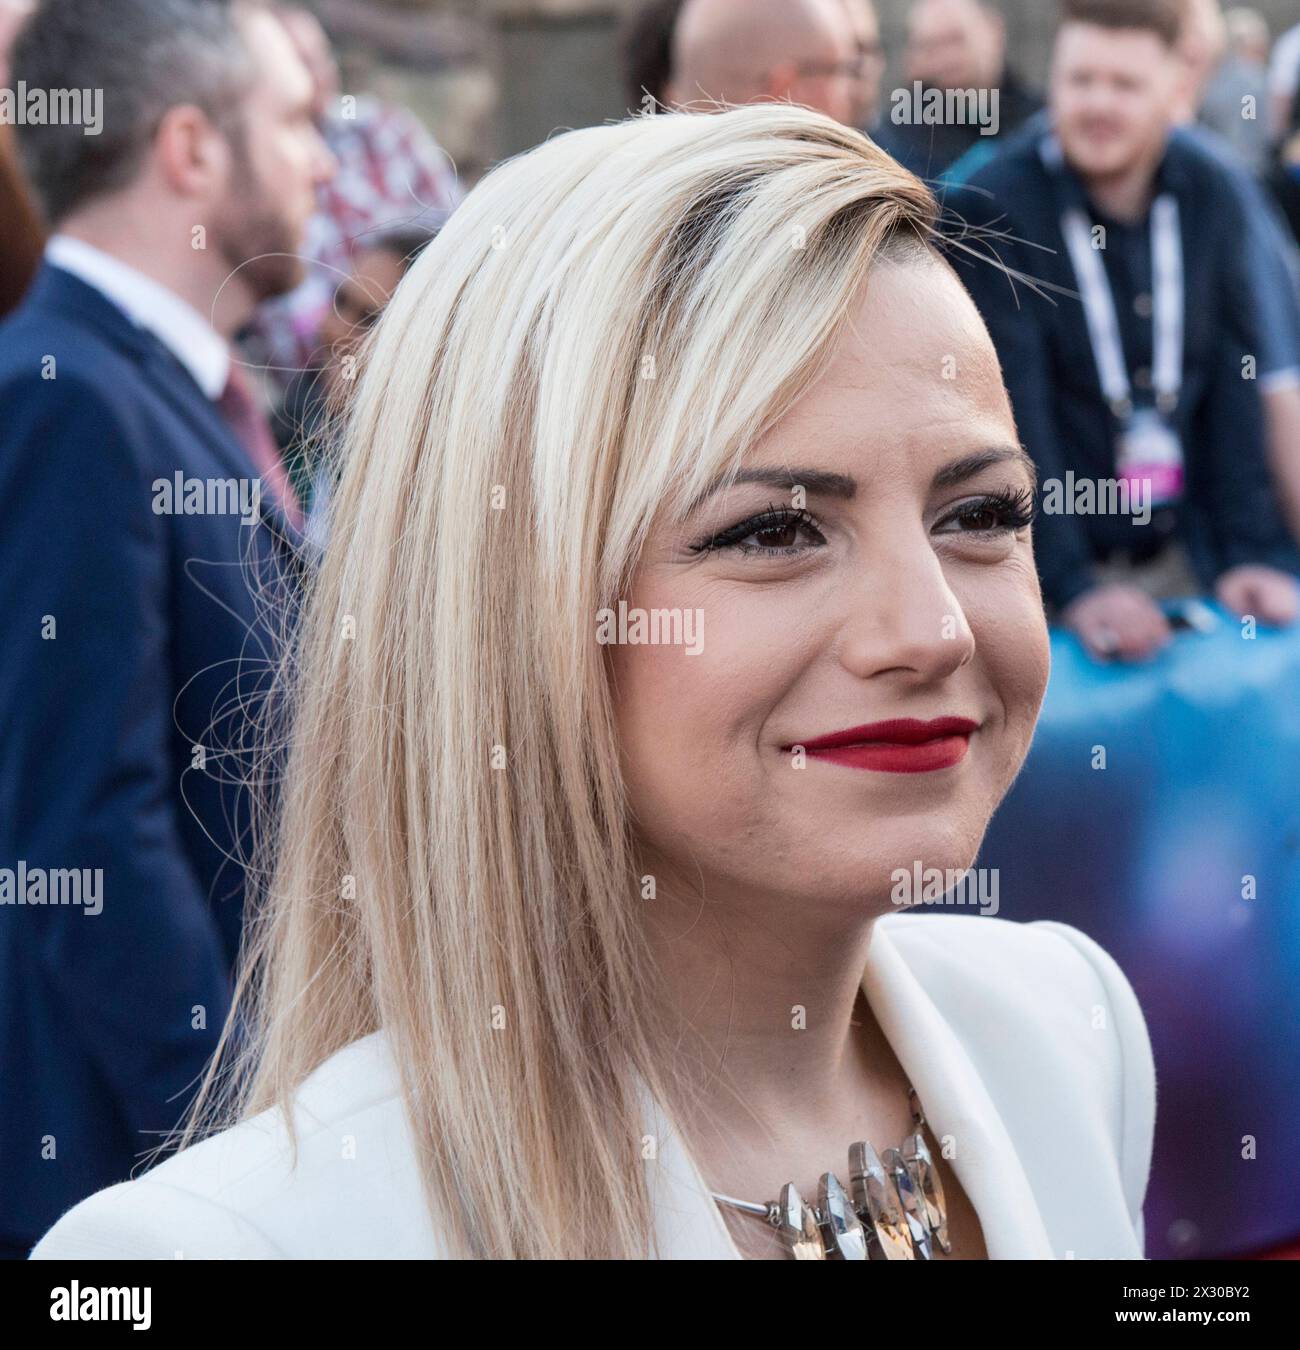 Eurovision Song Contest 2016, Stockholm, Sweden Stockholm, Sweden. 8 May. Poli Genova from Bulgaria on the red carpet for the ESC 2016. Stockholm Euroclub Sweden *** Eurovision Song Contest 2016, Stockholm, Sweden Stockholm, Sweden 8 May Poli Genova from Bulgaria on the red carpet for the ESC 2016 Stockholm Euroclub Sweden Stock Photo